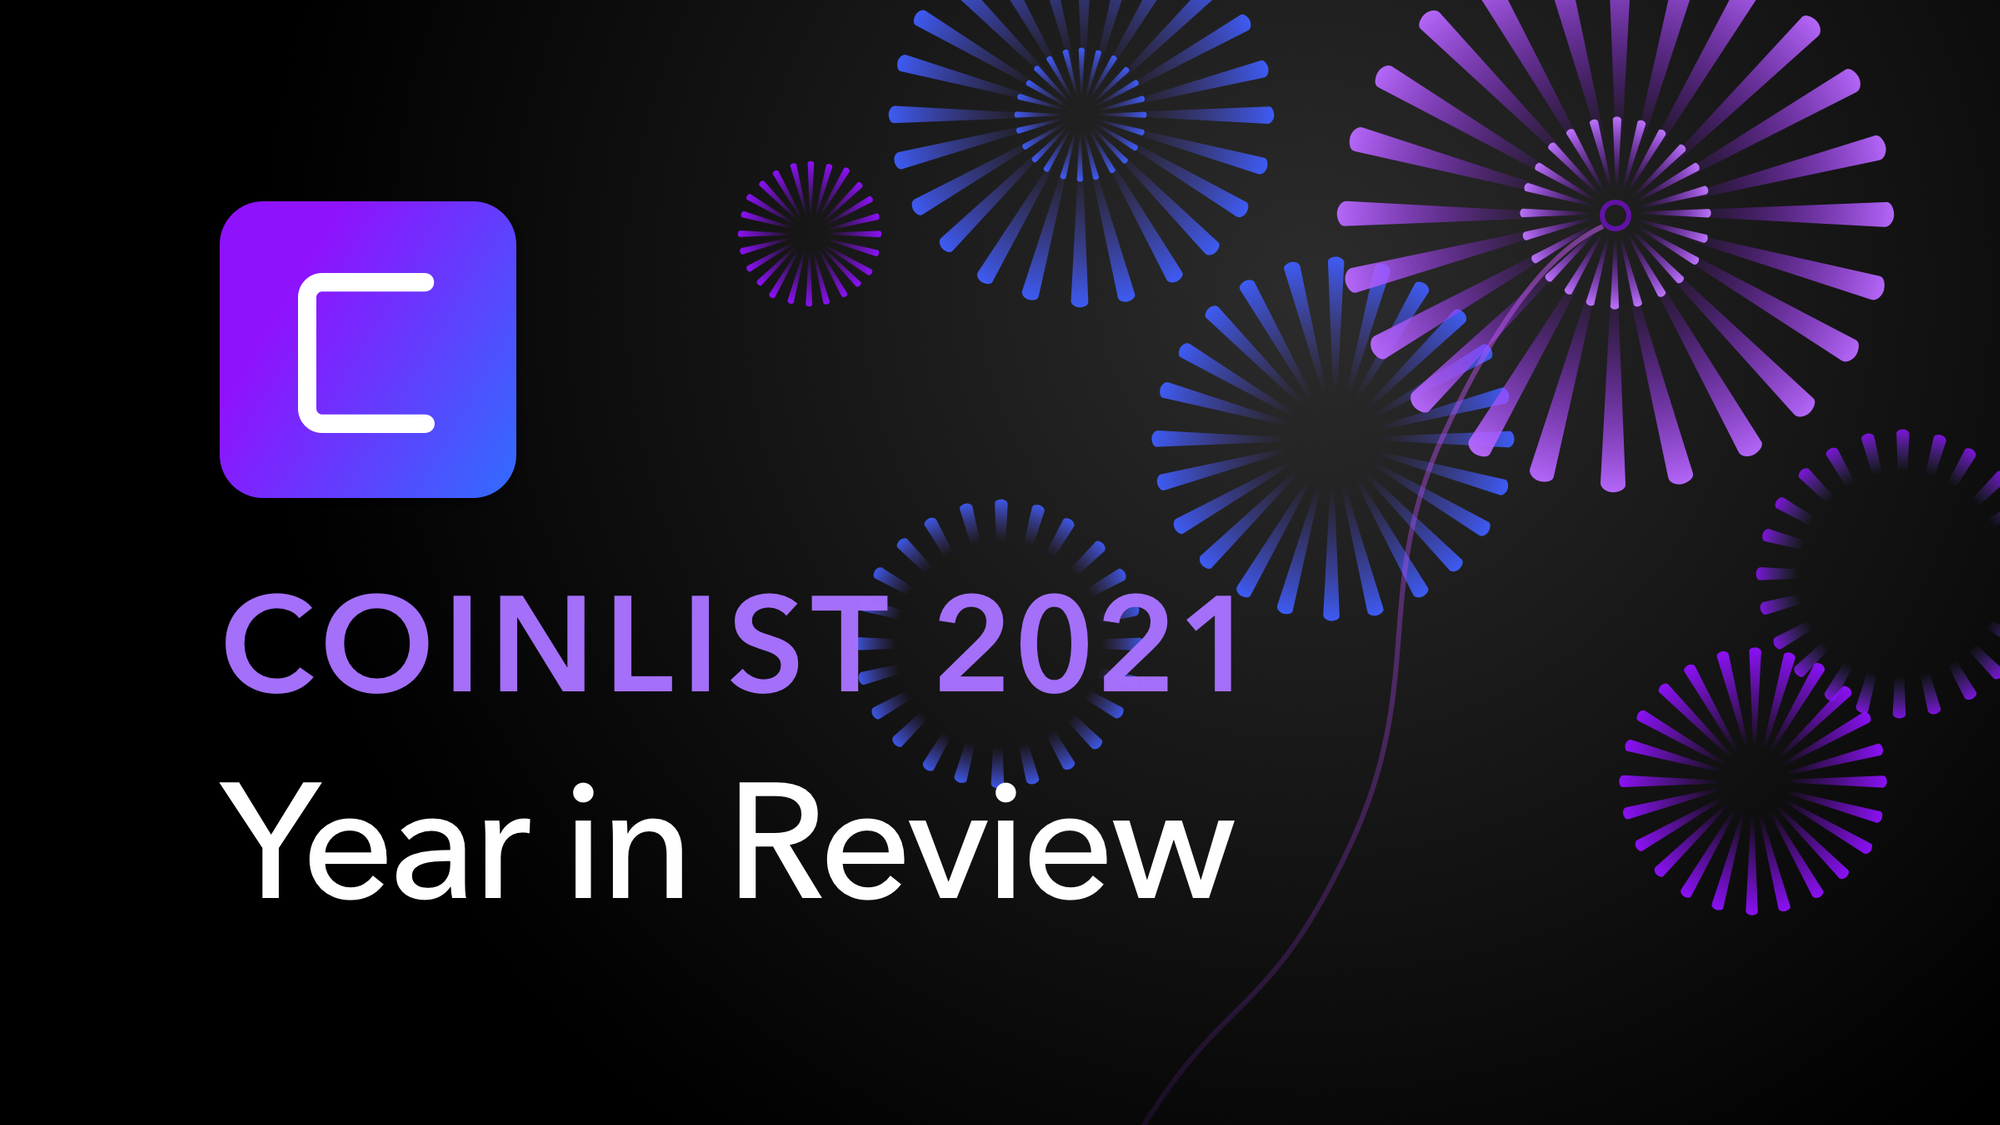 CoinList 2021: Year in Review